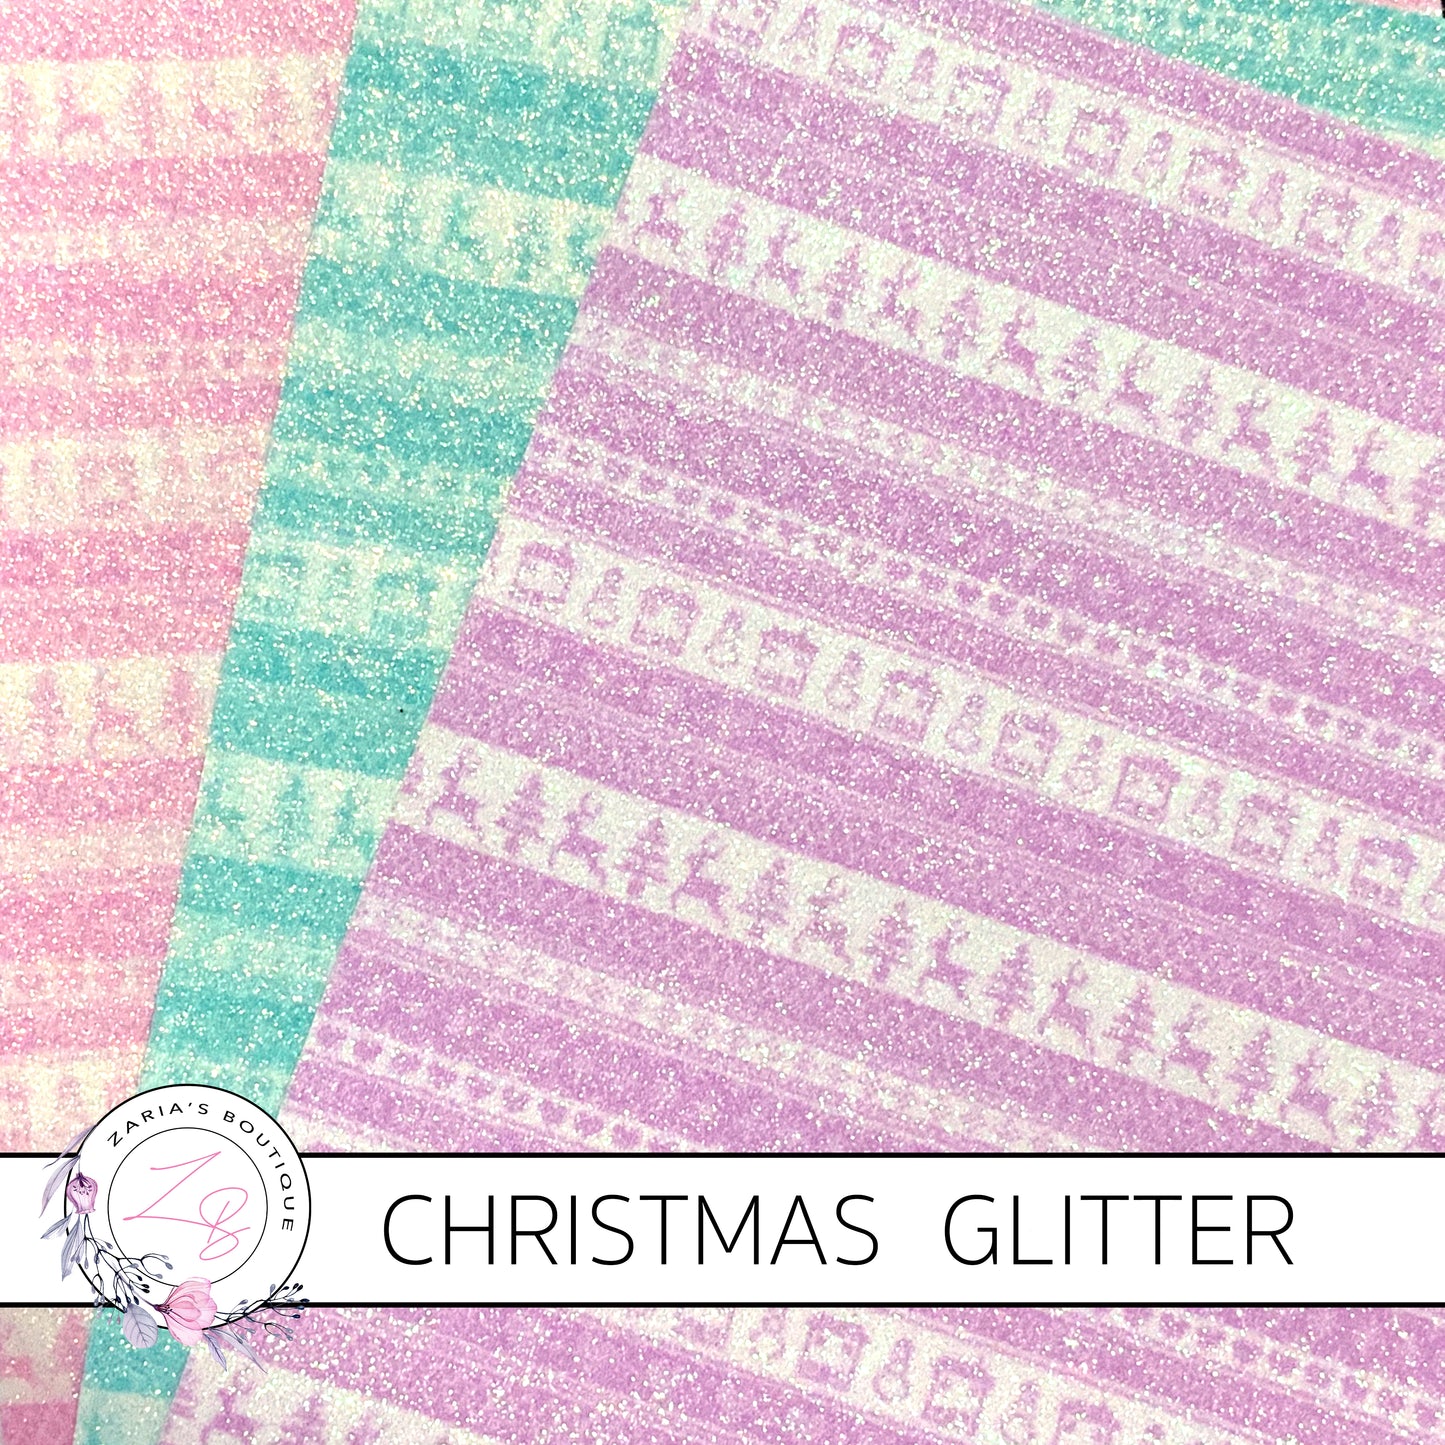 ⋅ Christmas Sweaters ⋅ Fine Glitter Bow Fabric ⋅ 3 Colours ⋅